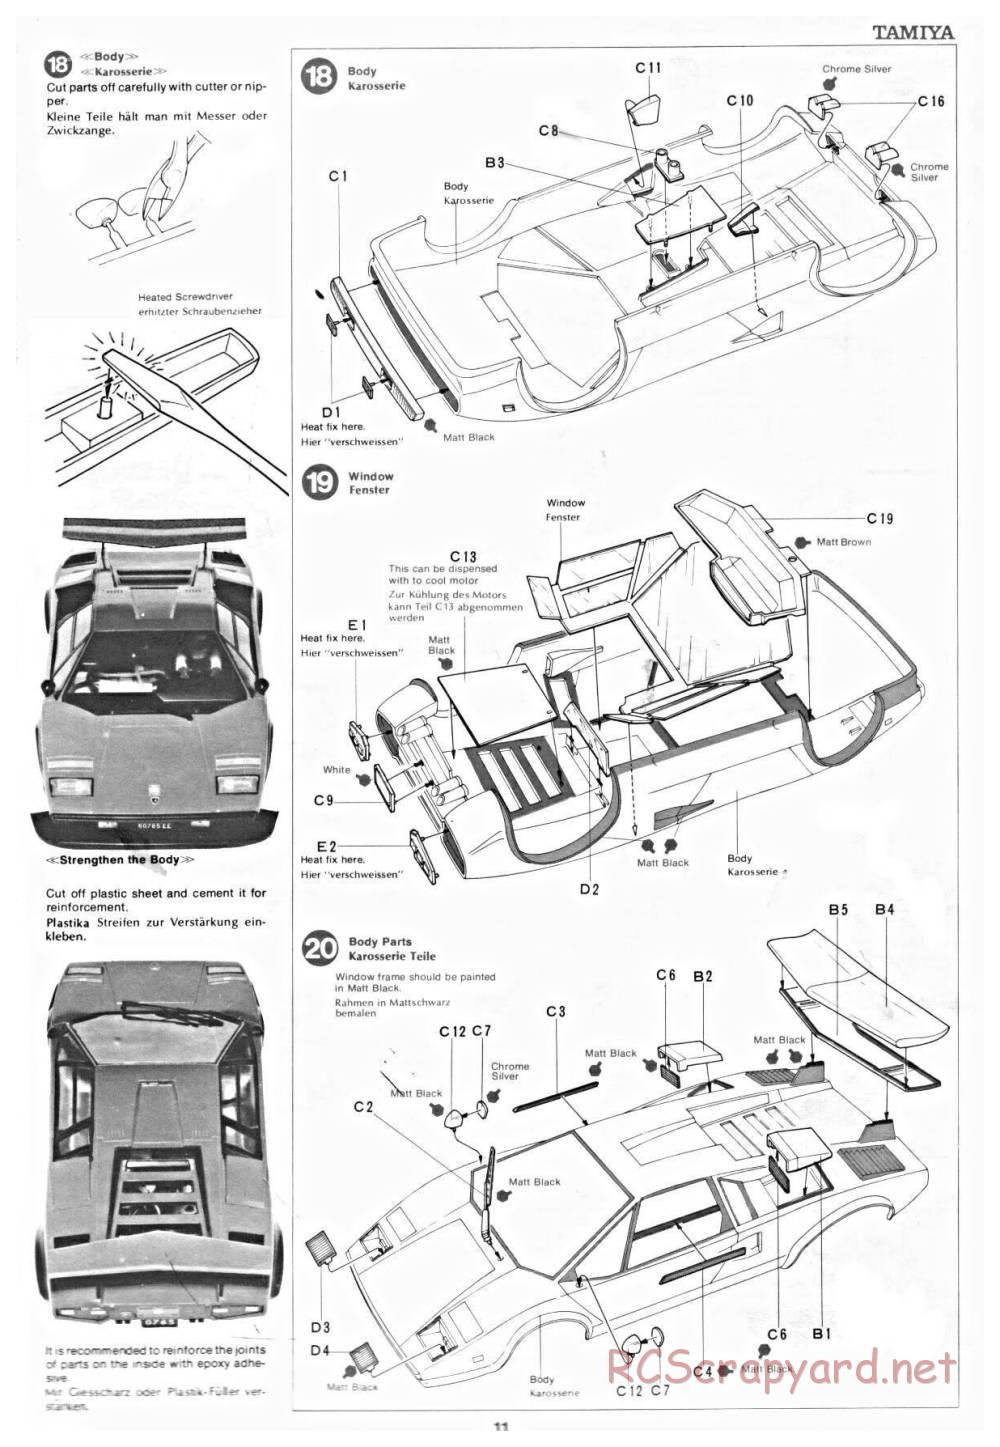 Tamiya - Lmbrghni Countach LP500S - 58005 - Manual - Page 11